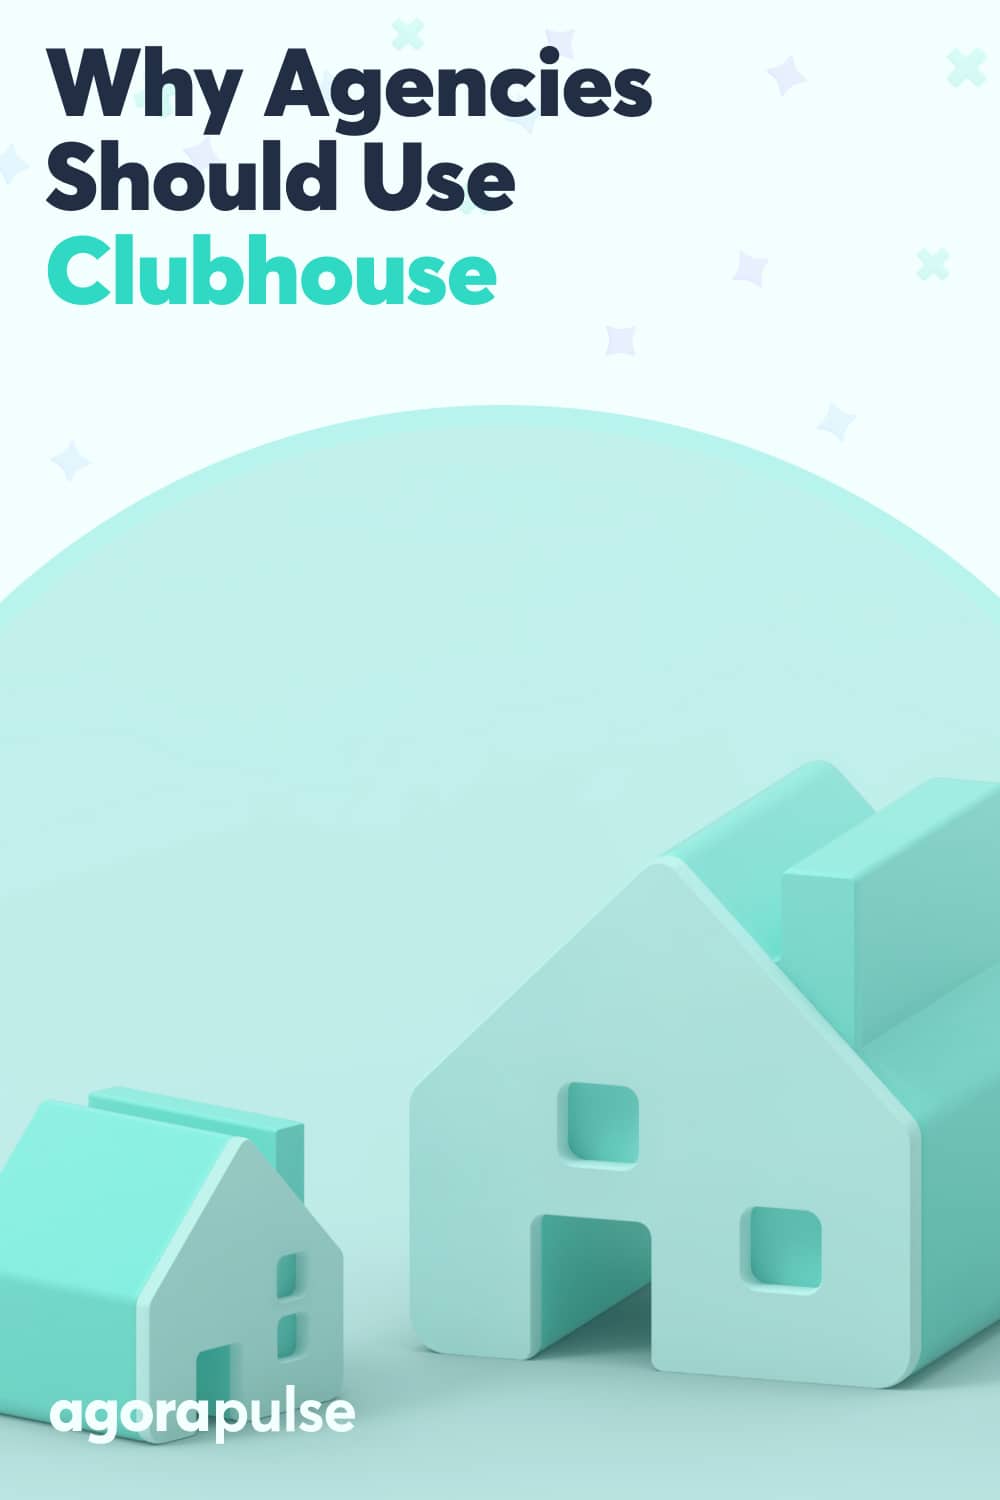 Clubhouse: What Is It and Why Should Agencies Care About It?